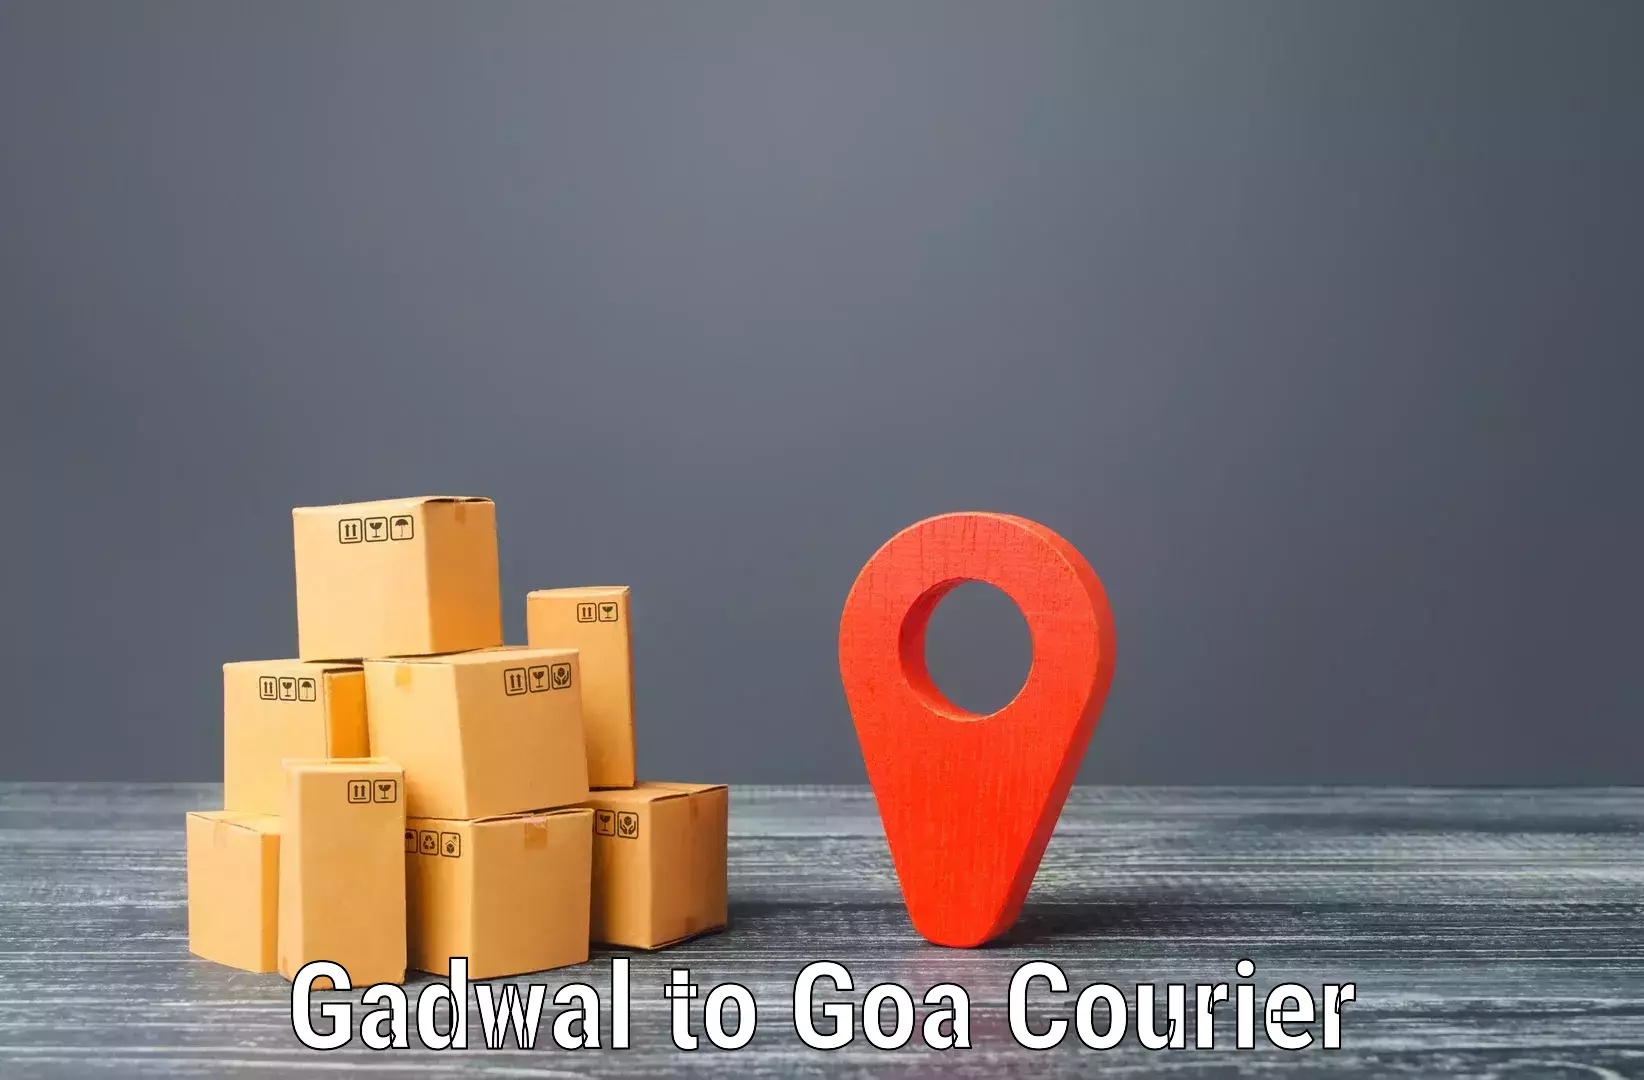 Comprehensive shipping services in Gadwal to Vasco da Gama